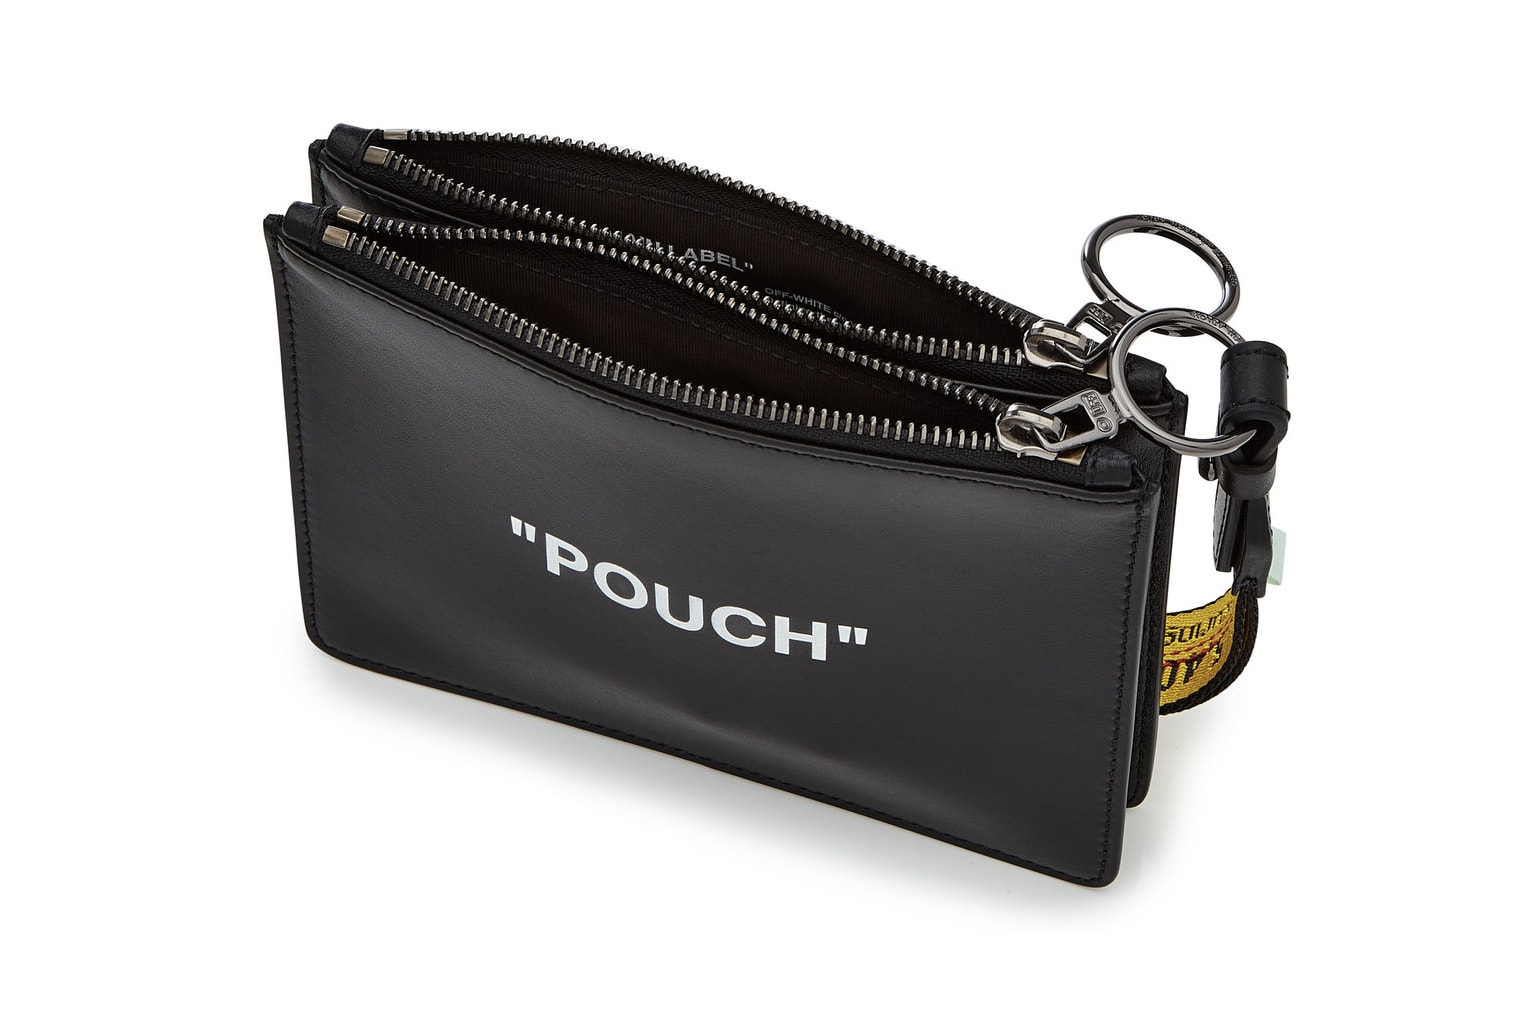 Off-White™ Black Leather "POUCH" Industrial Strap Wallet Clutch Bag